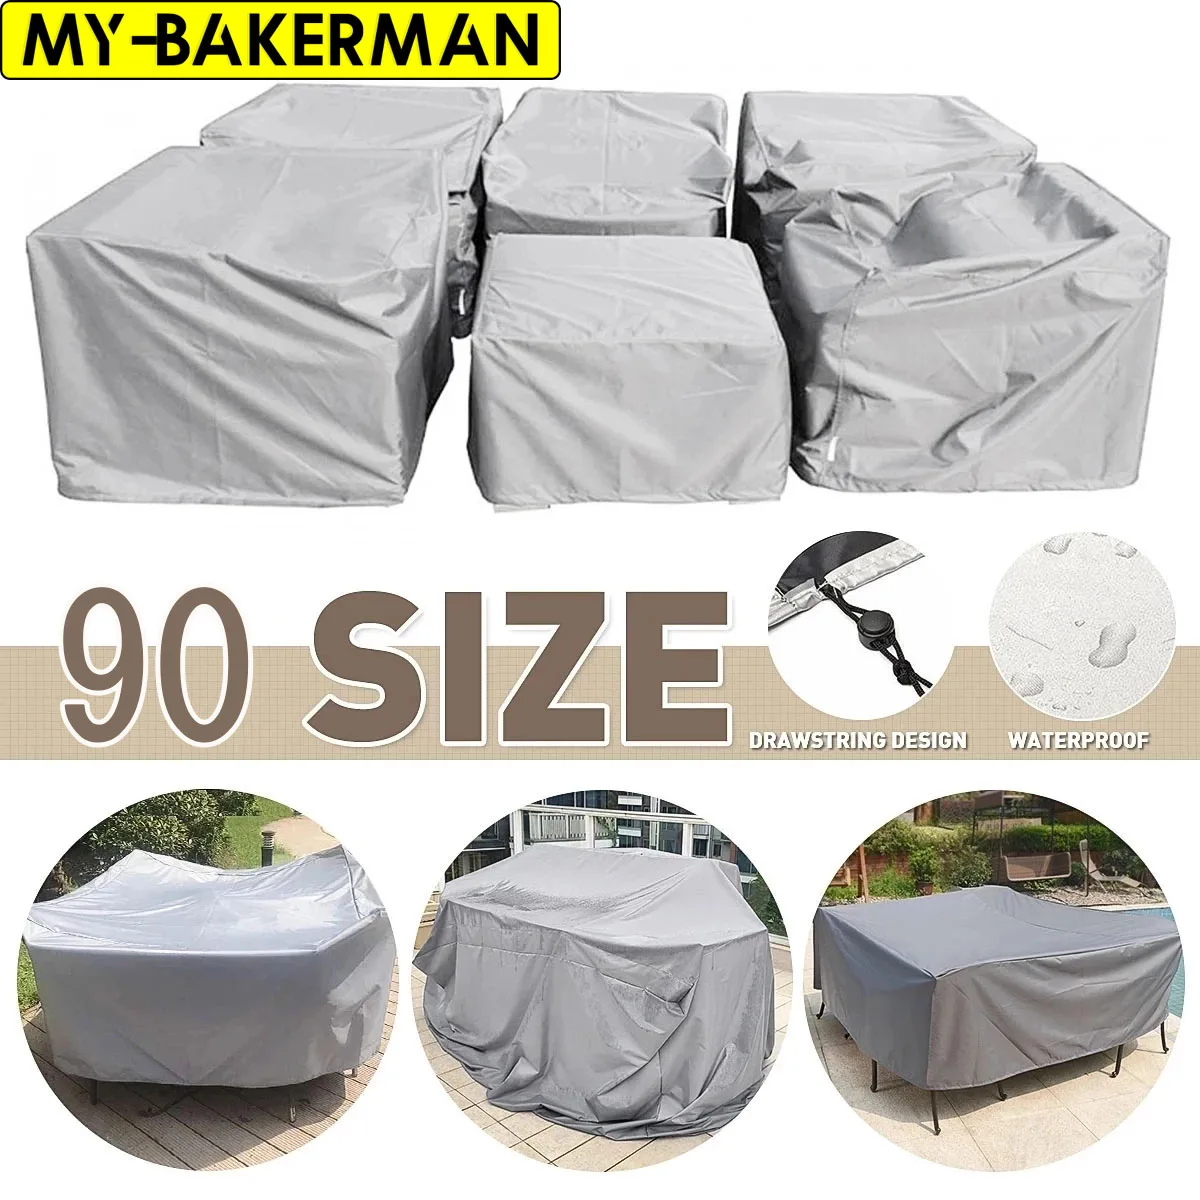 90 Sizes Outdoor Patio Garden Furniture Waterproof Covers Rain Snow Chair covers for Sofa Table Chair Dust kitchen Proof Cover